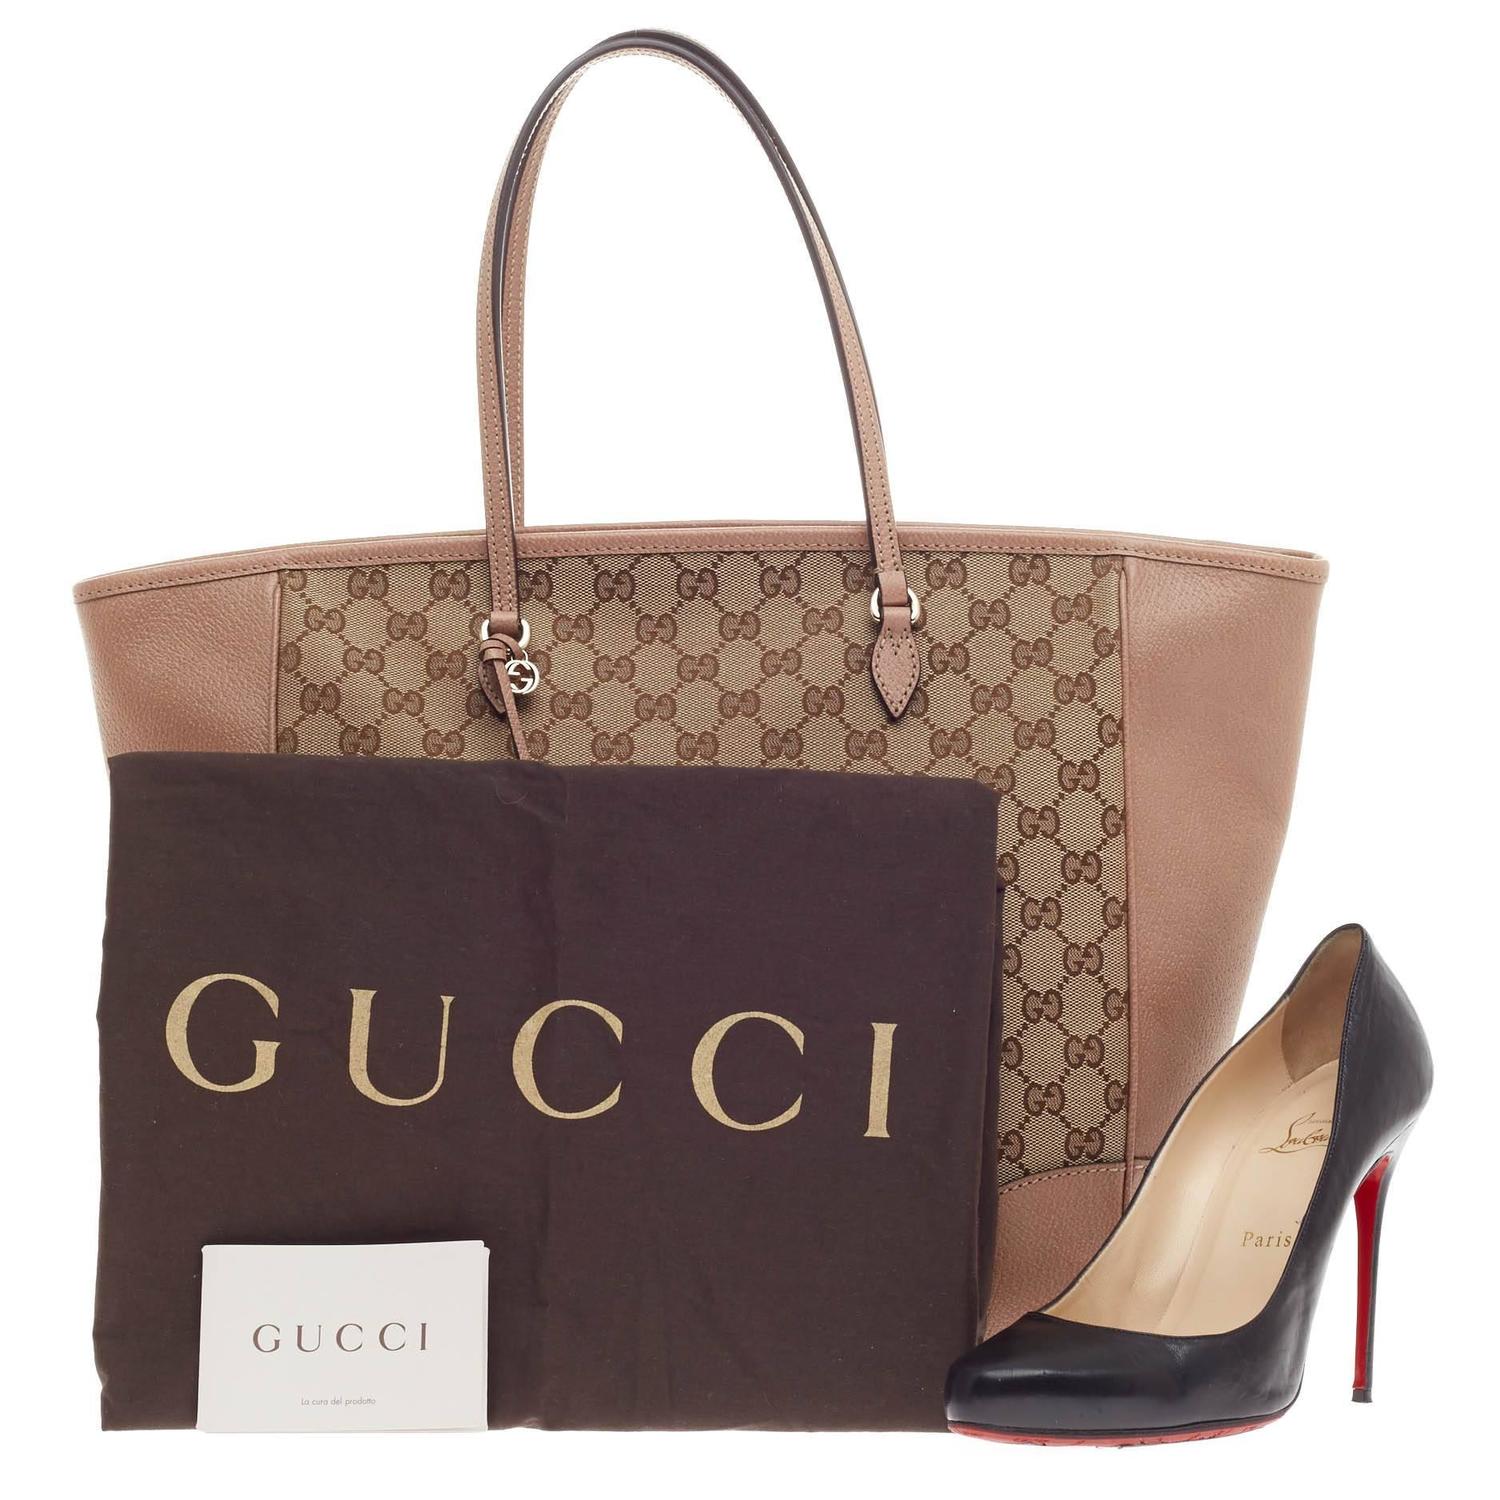 Gucci Bree Original Tote Leather and GG Canvas Medium at 1stdibs